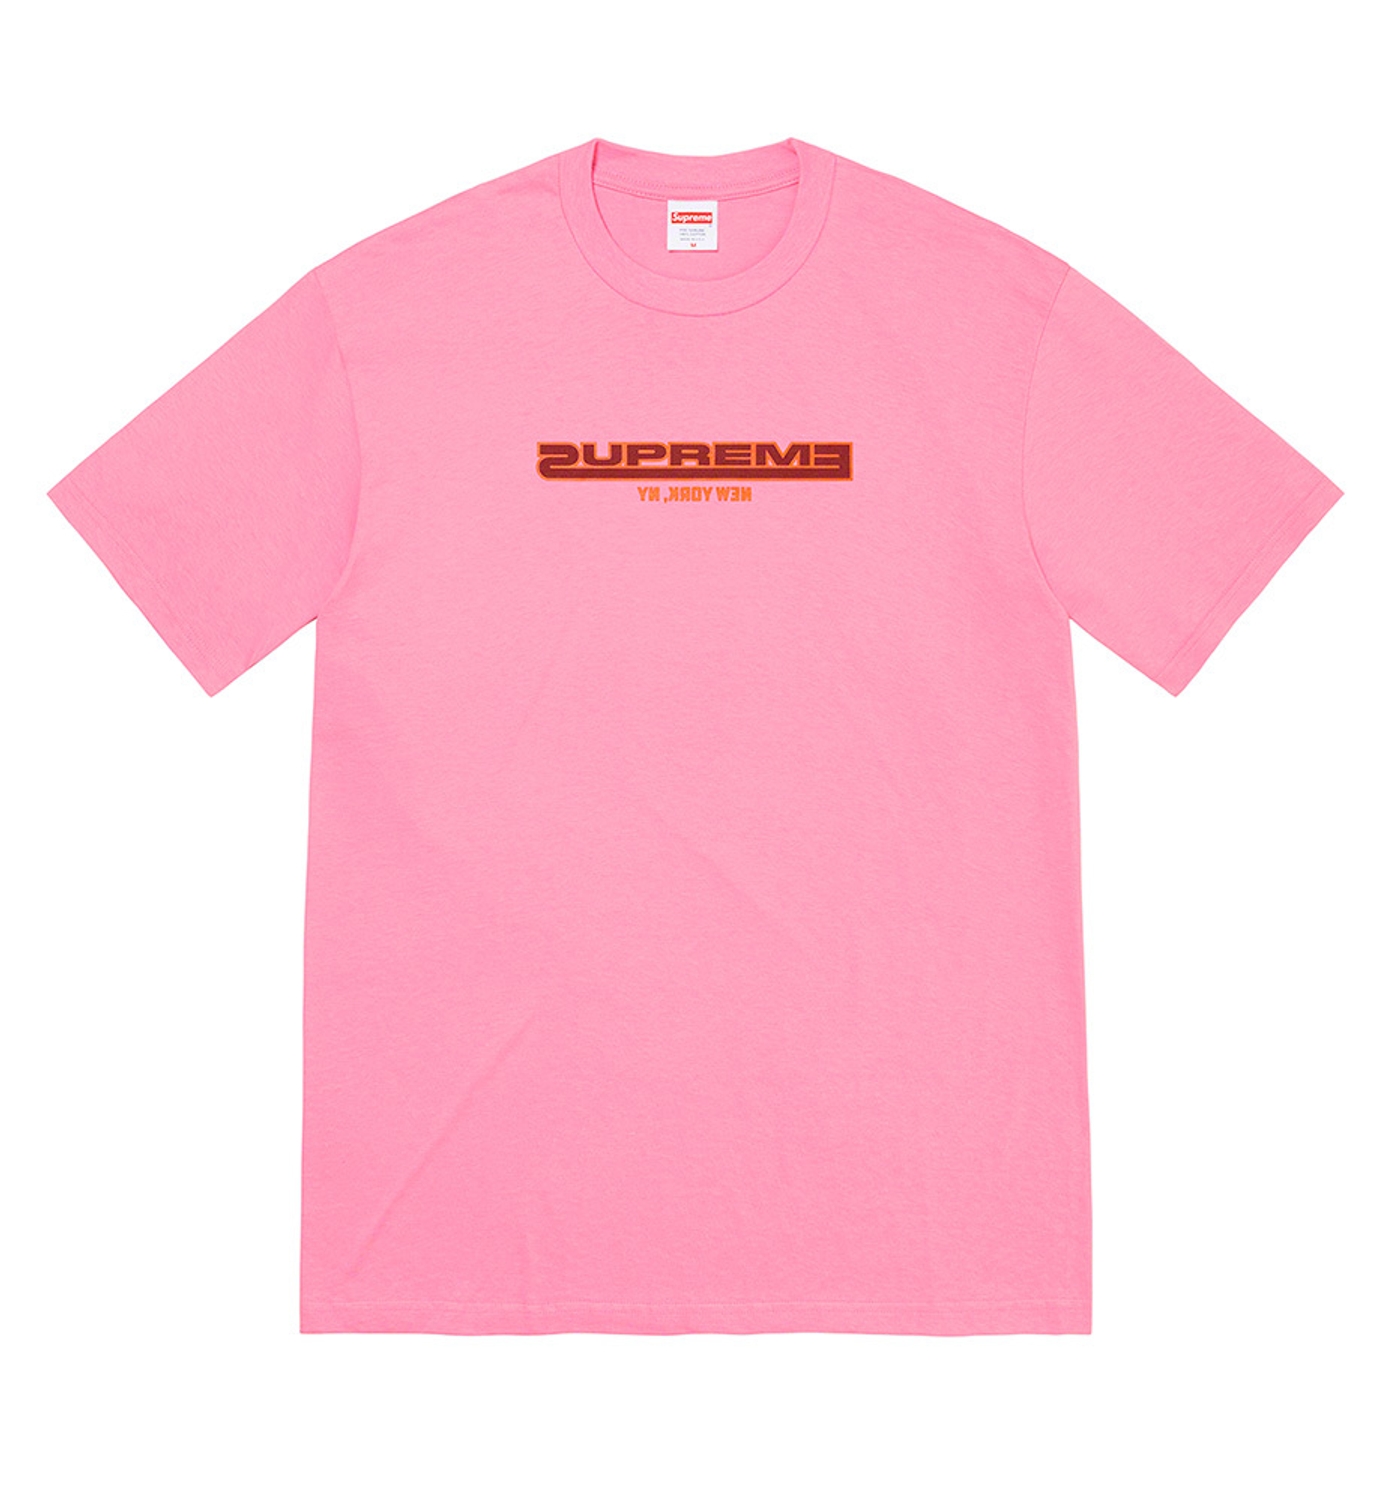 Connected Tee (18/20)